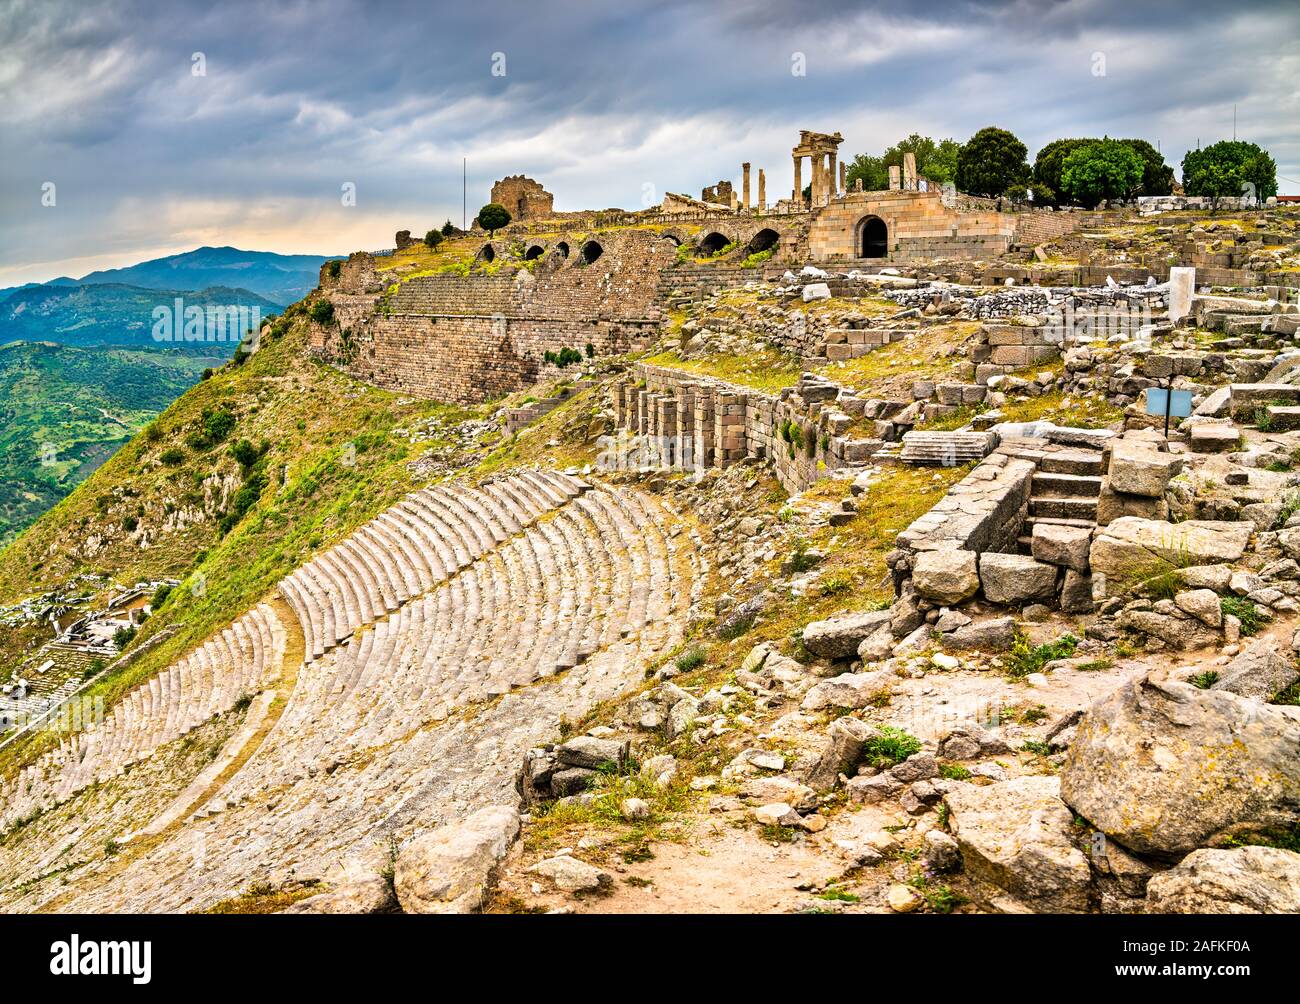 ruins-of-the-ancient-city-of-pergamon-in-turkey-2AFKF0A.jpg